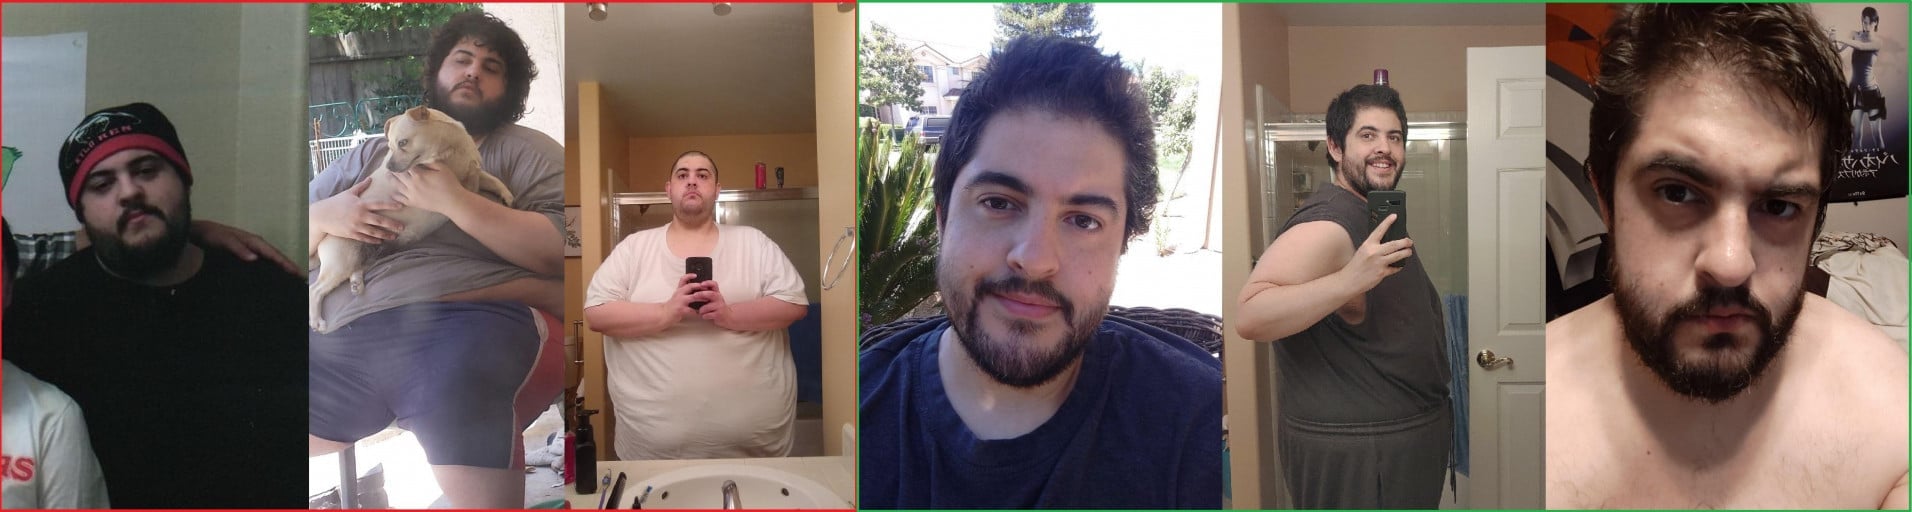 A before and after photo of a 6'0" male showing a weight reduction from 520 pounds to 320 pounds. A total loss of 200 pounds.